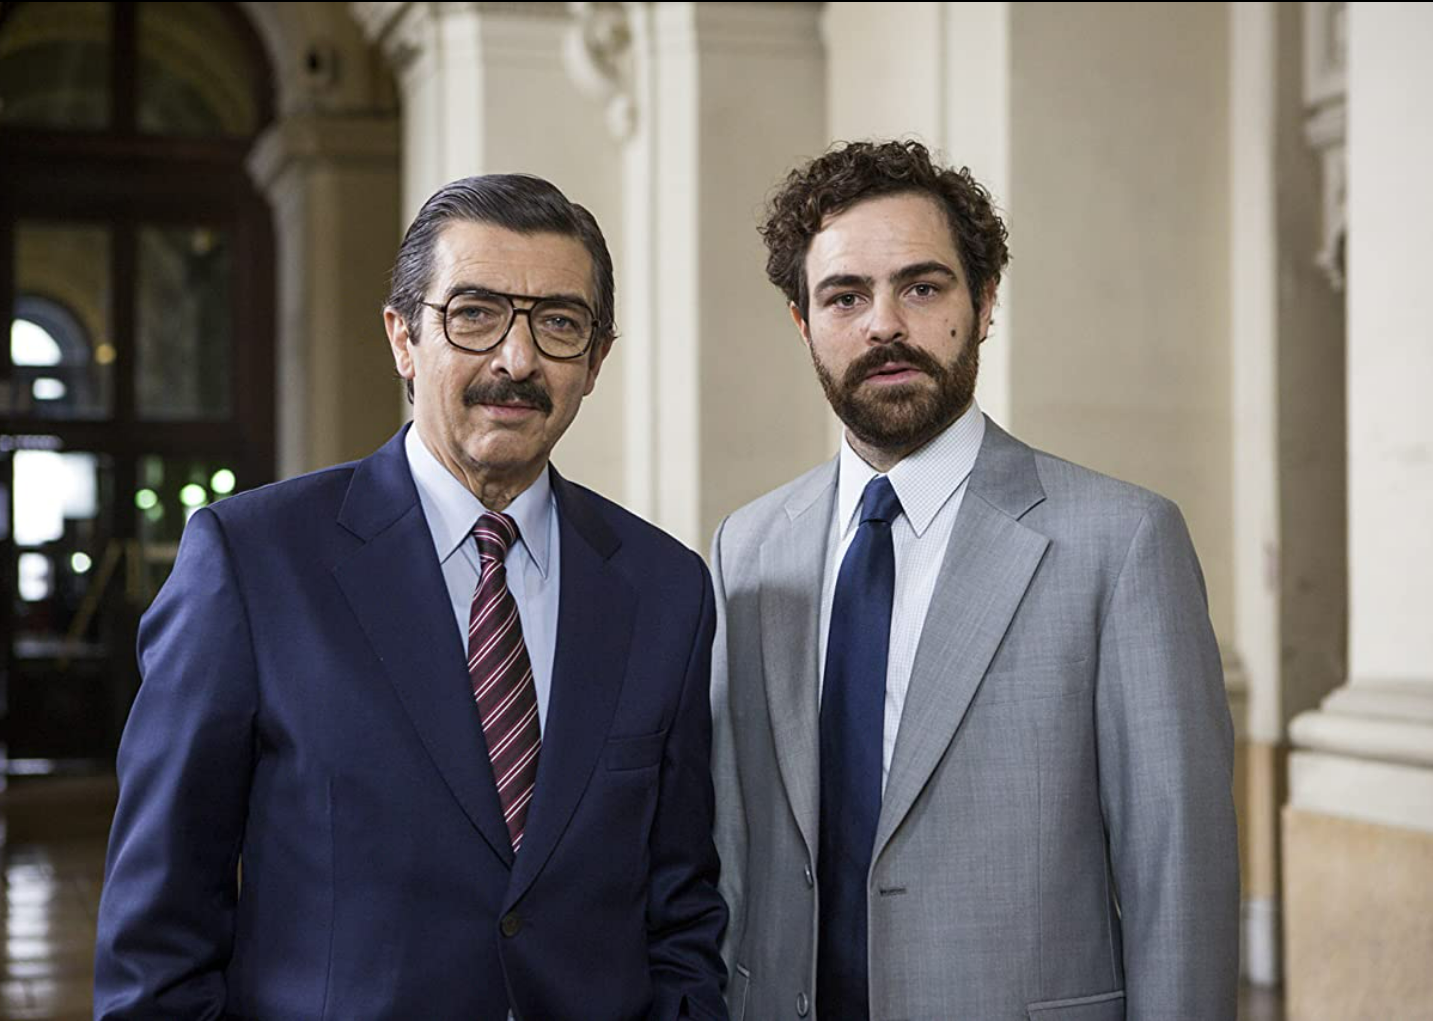 Ricardo Darín and Peter Lanzani in a scene from "Argentina, 1985".